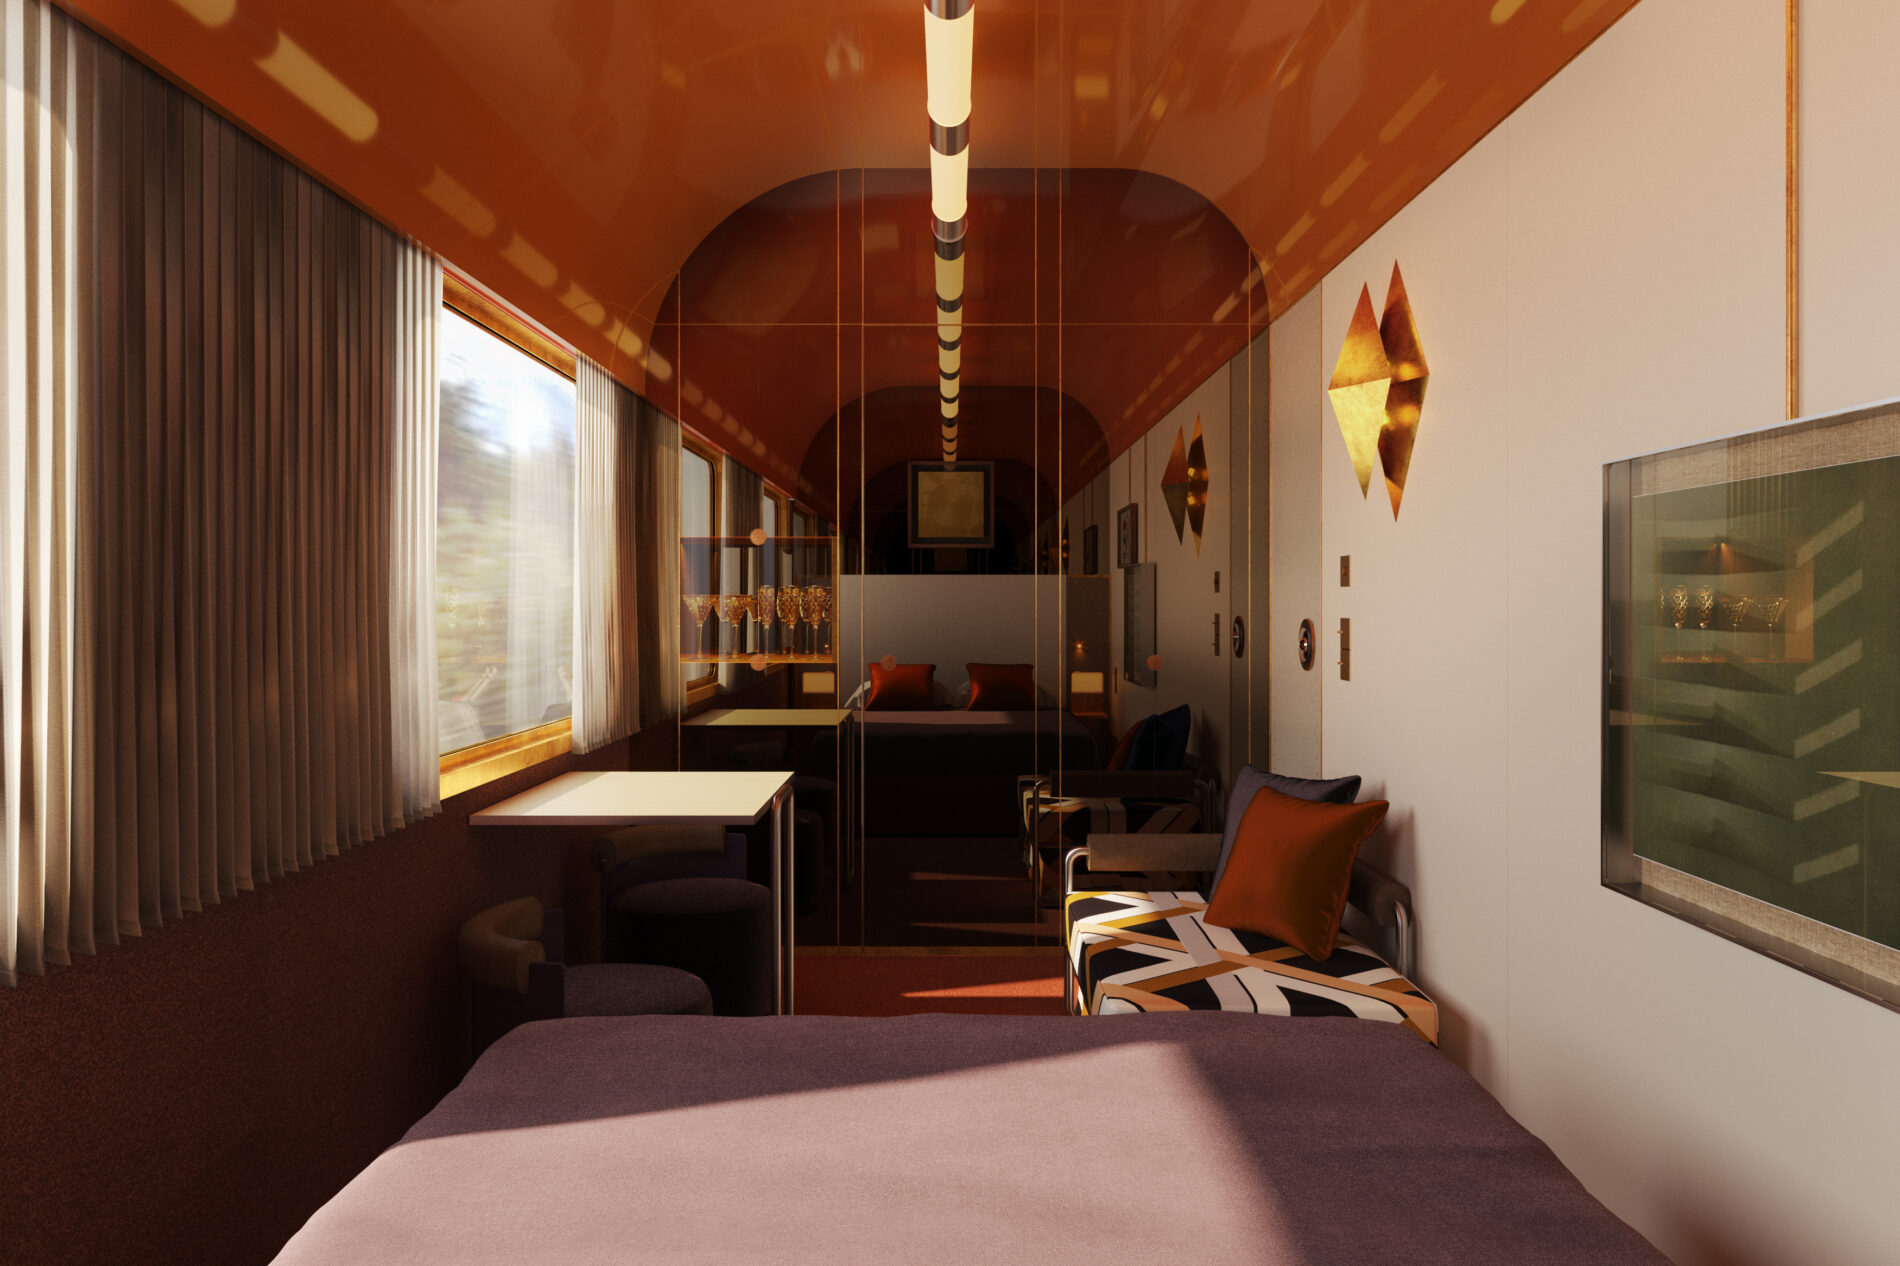 You Can Now Pre-Book Your Journey On Italy's New Luxury Orient Express Train